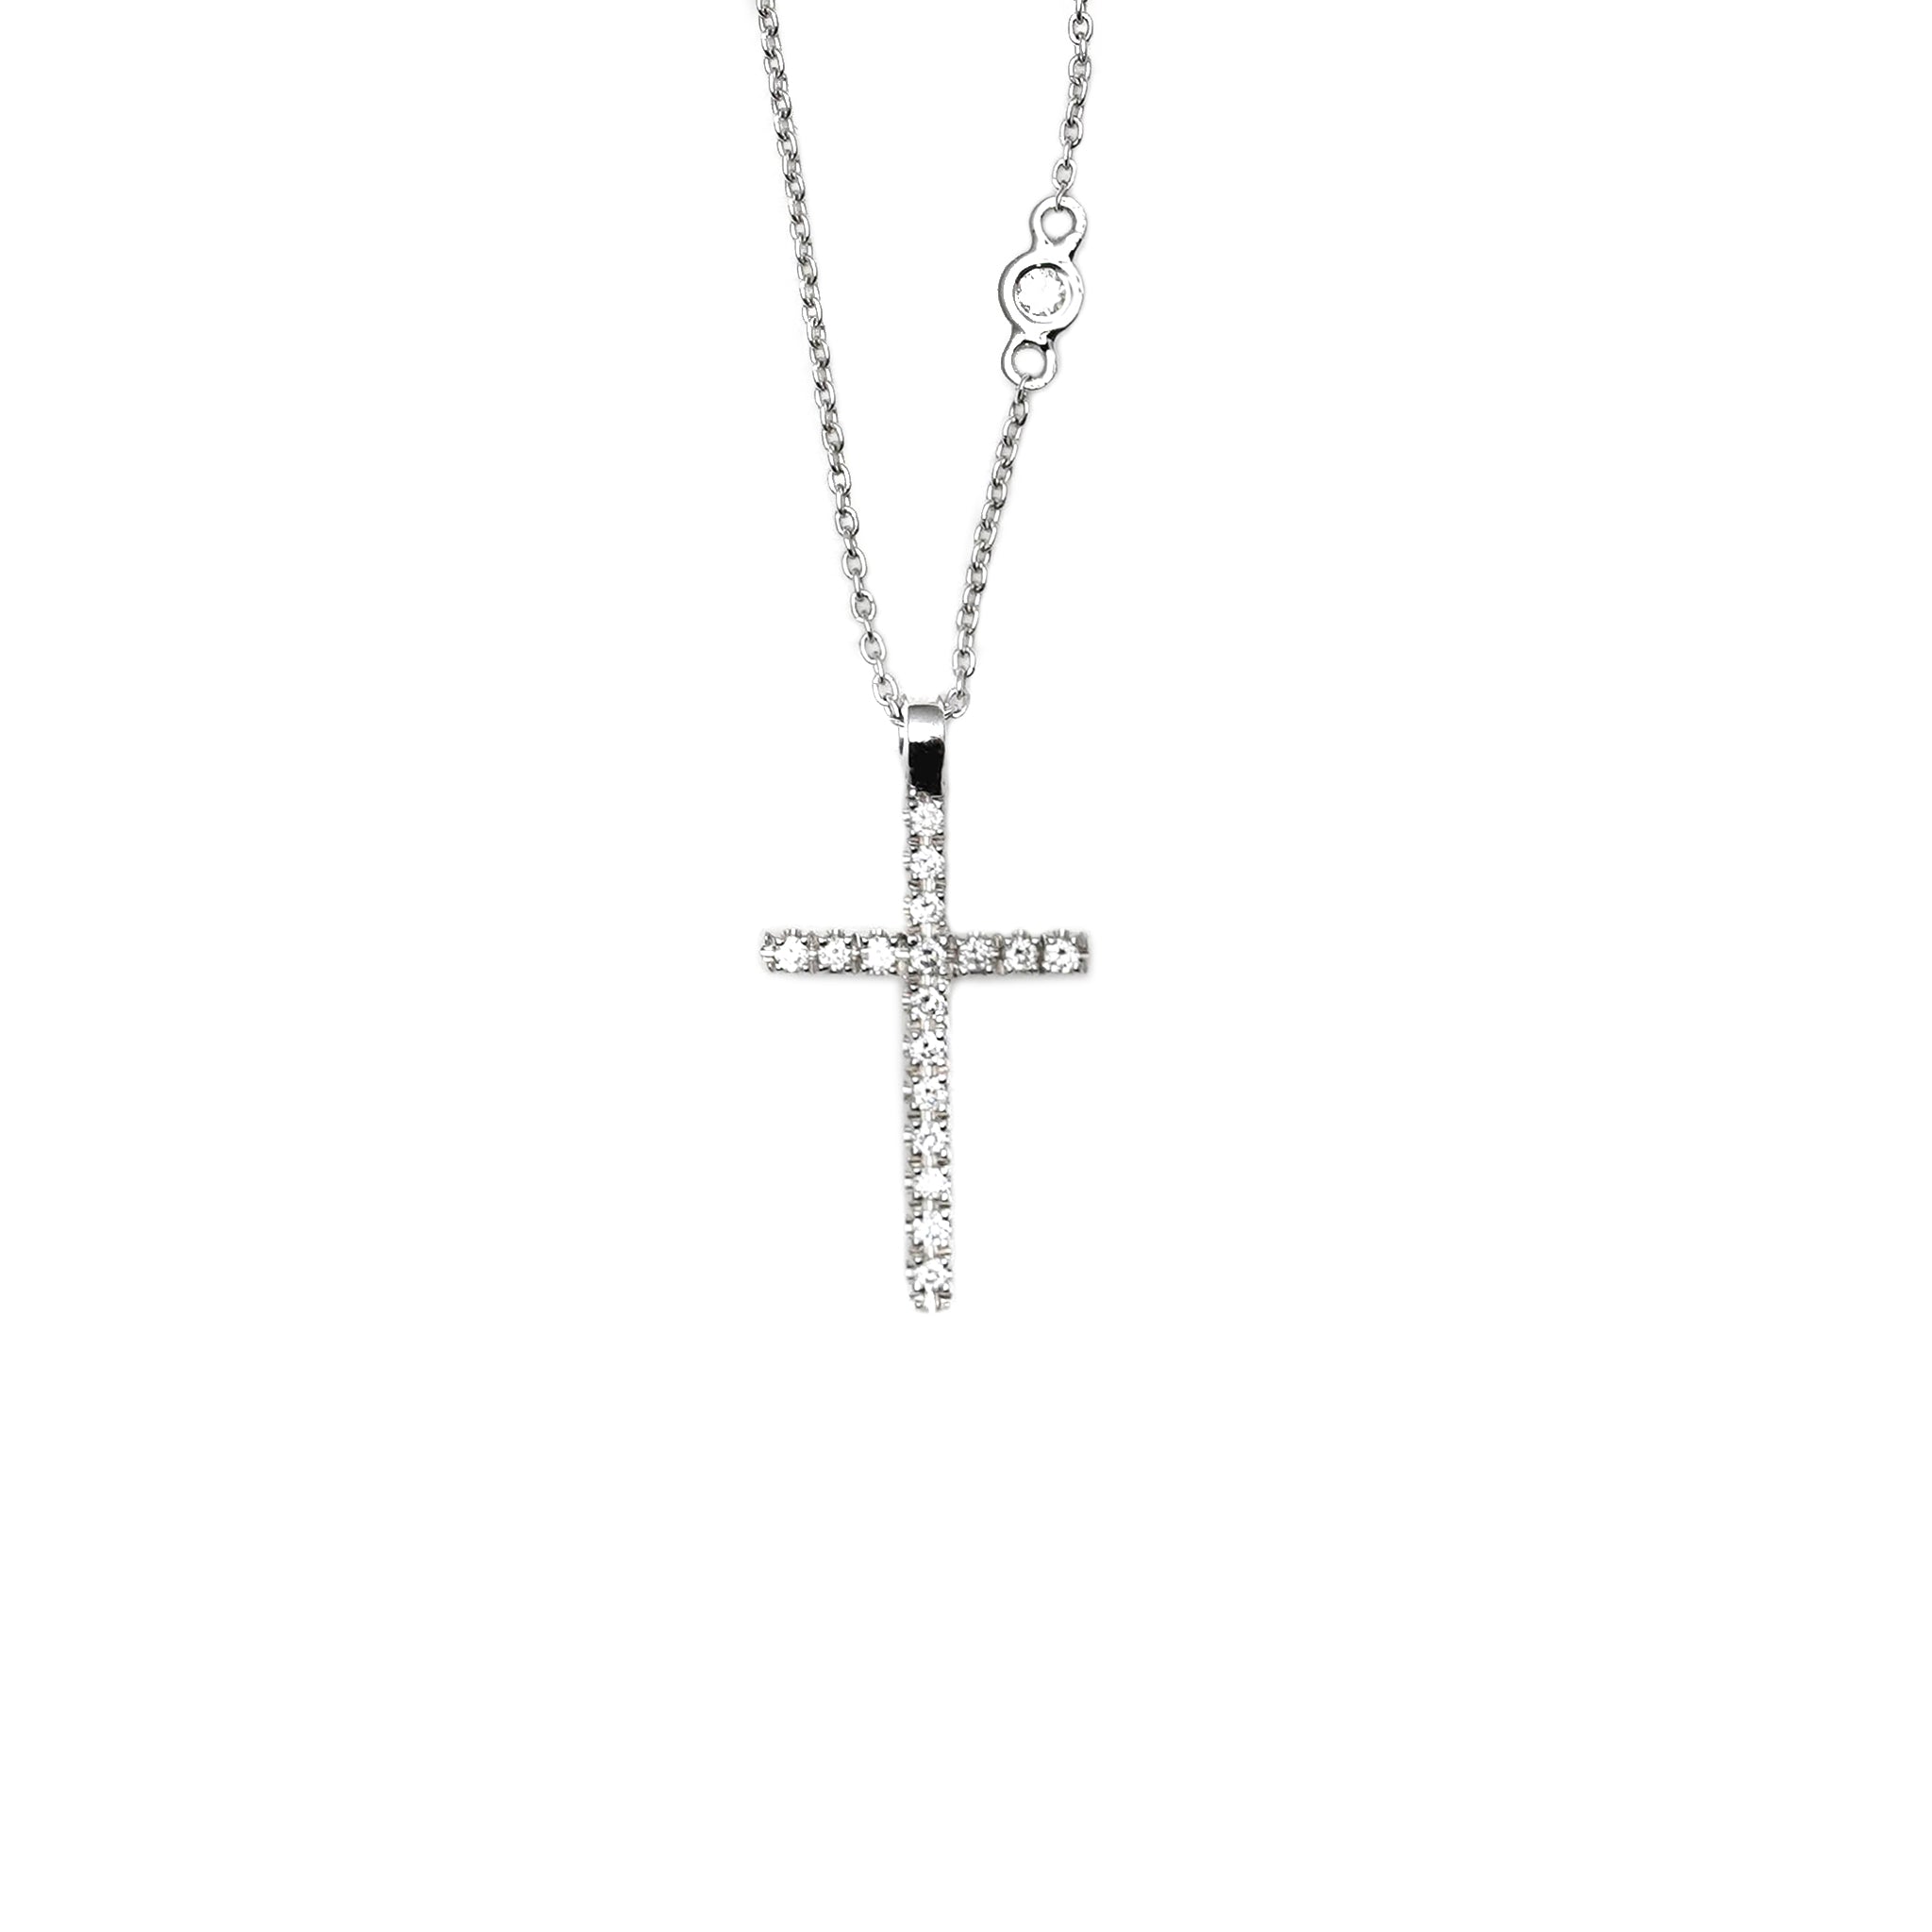 18K White Gold Diamond Cross Necklace (Petite) with 18k White Gold Chain